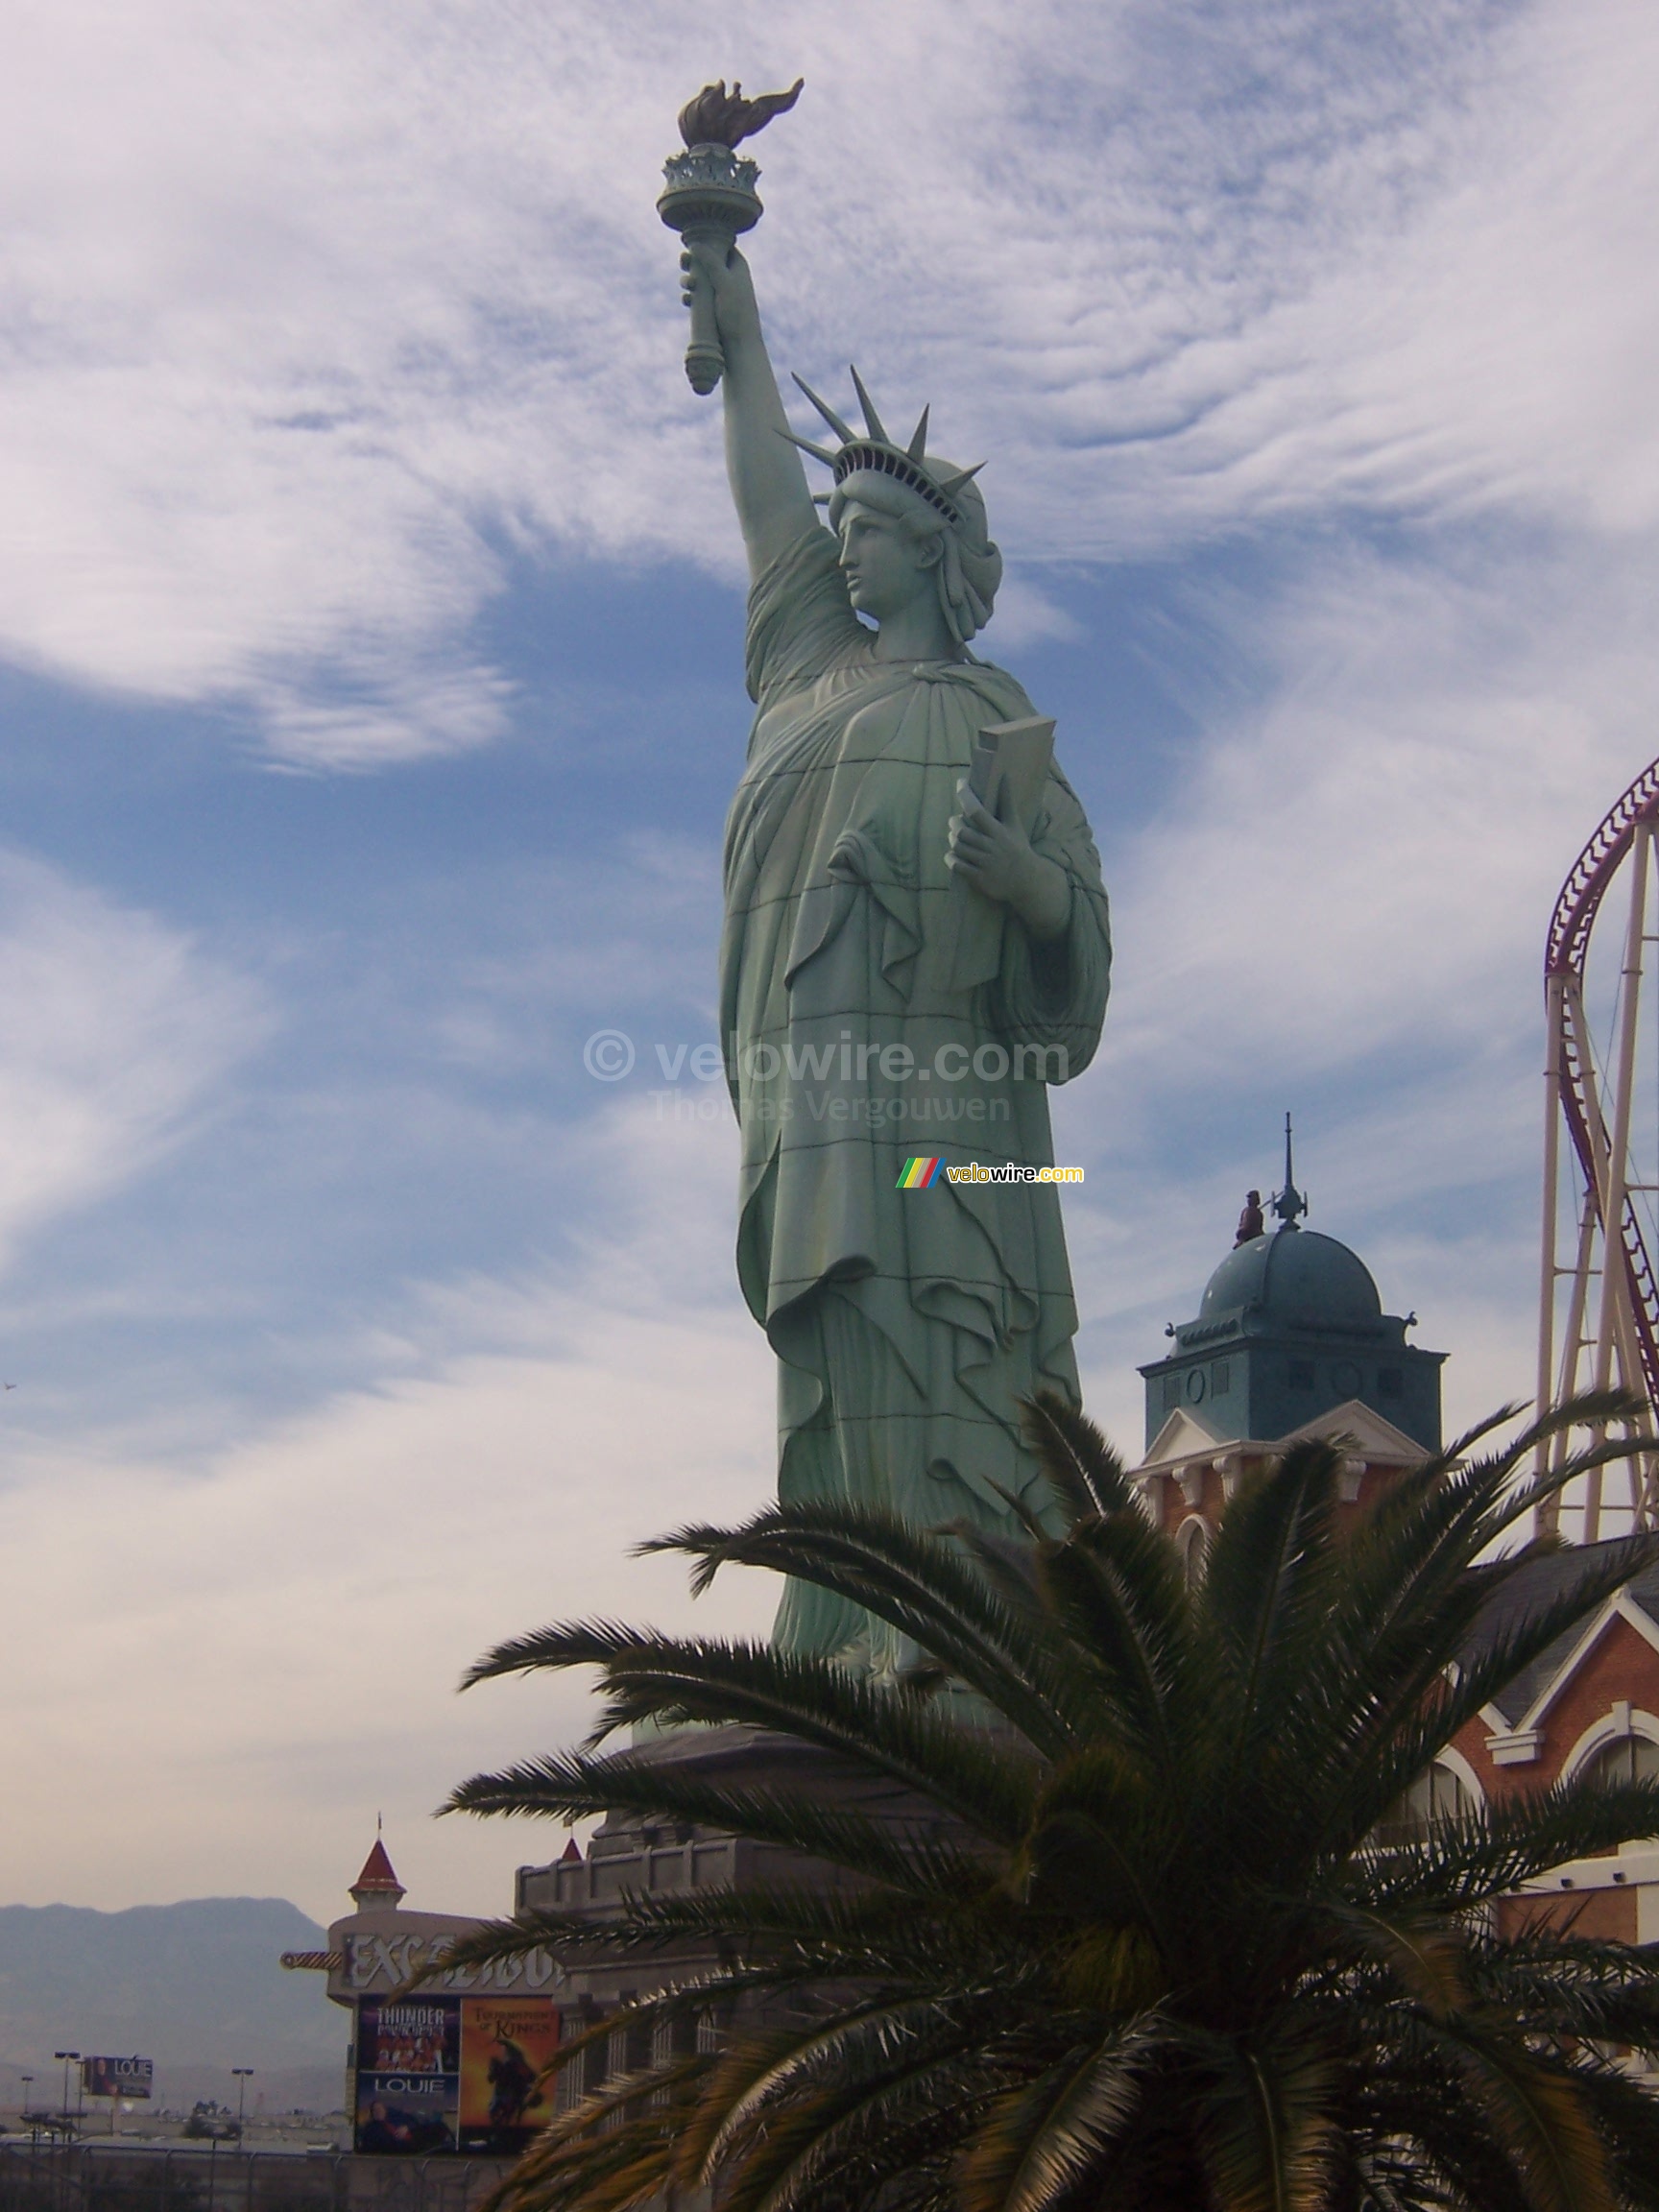 Replica of the Statue of Liberty near the New York New York Hotel